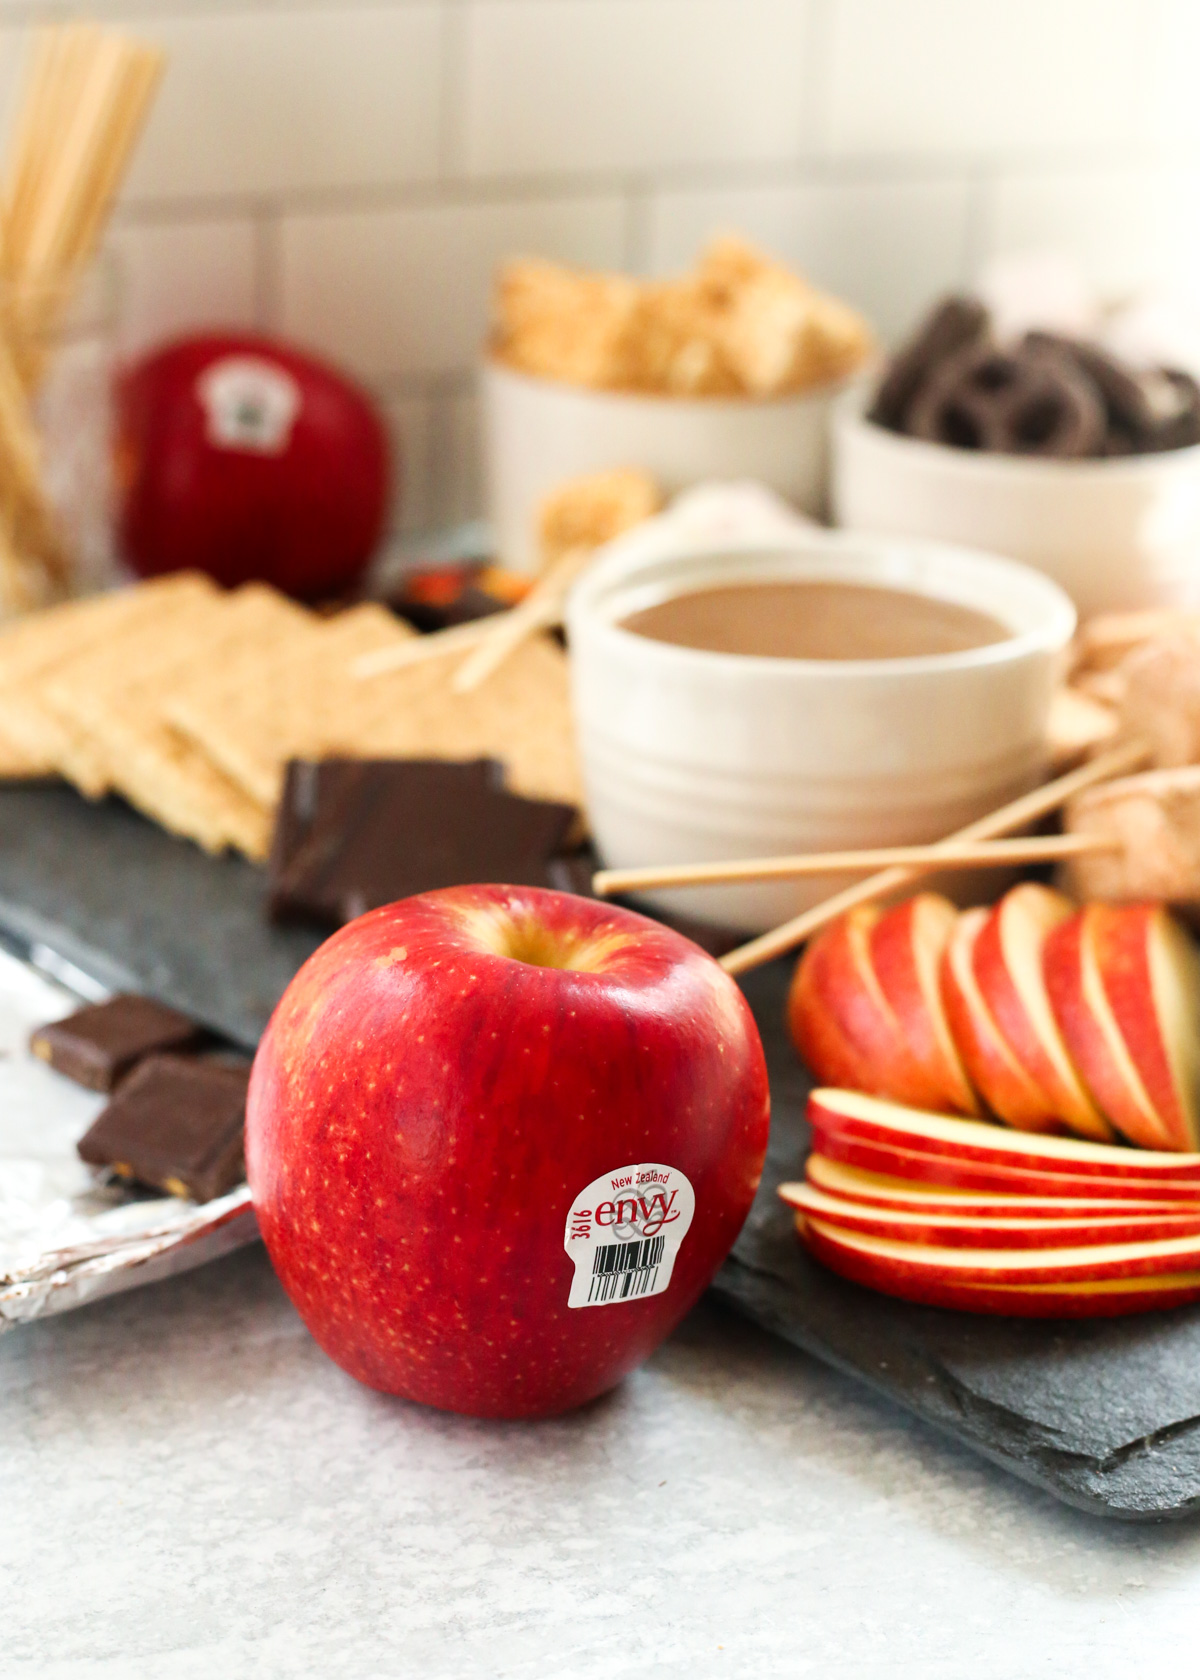 A centered shot of an Envy apple, with bright red and yellow skin, sitting in front of a dessert board with chocolate, chocolate covered pretzels, marshmallows, graham crackers, and various other ingredients in the background